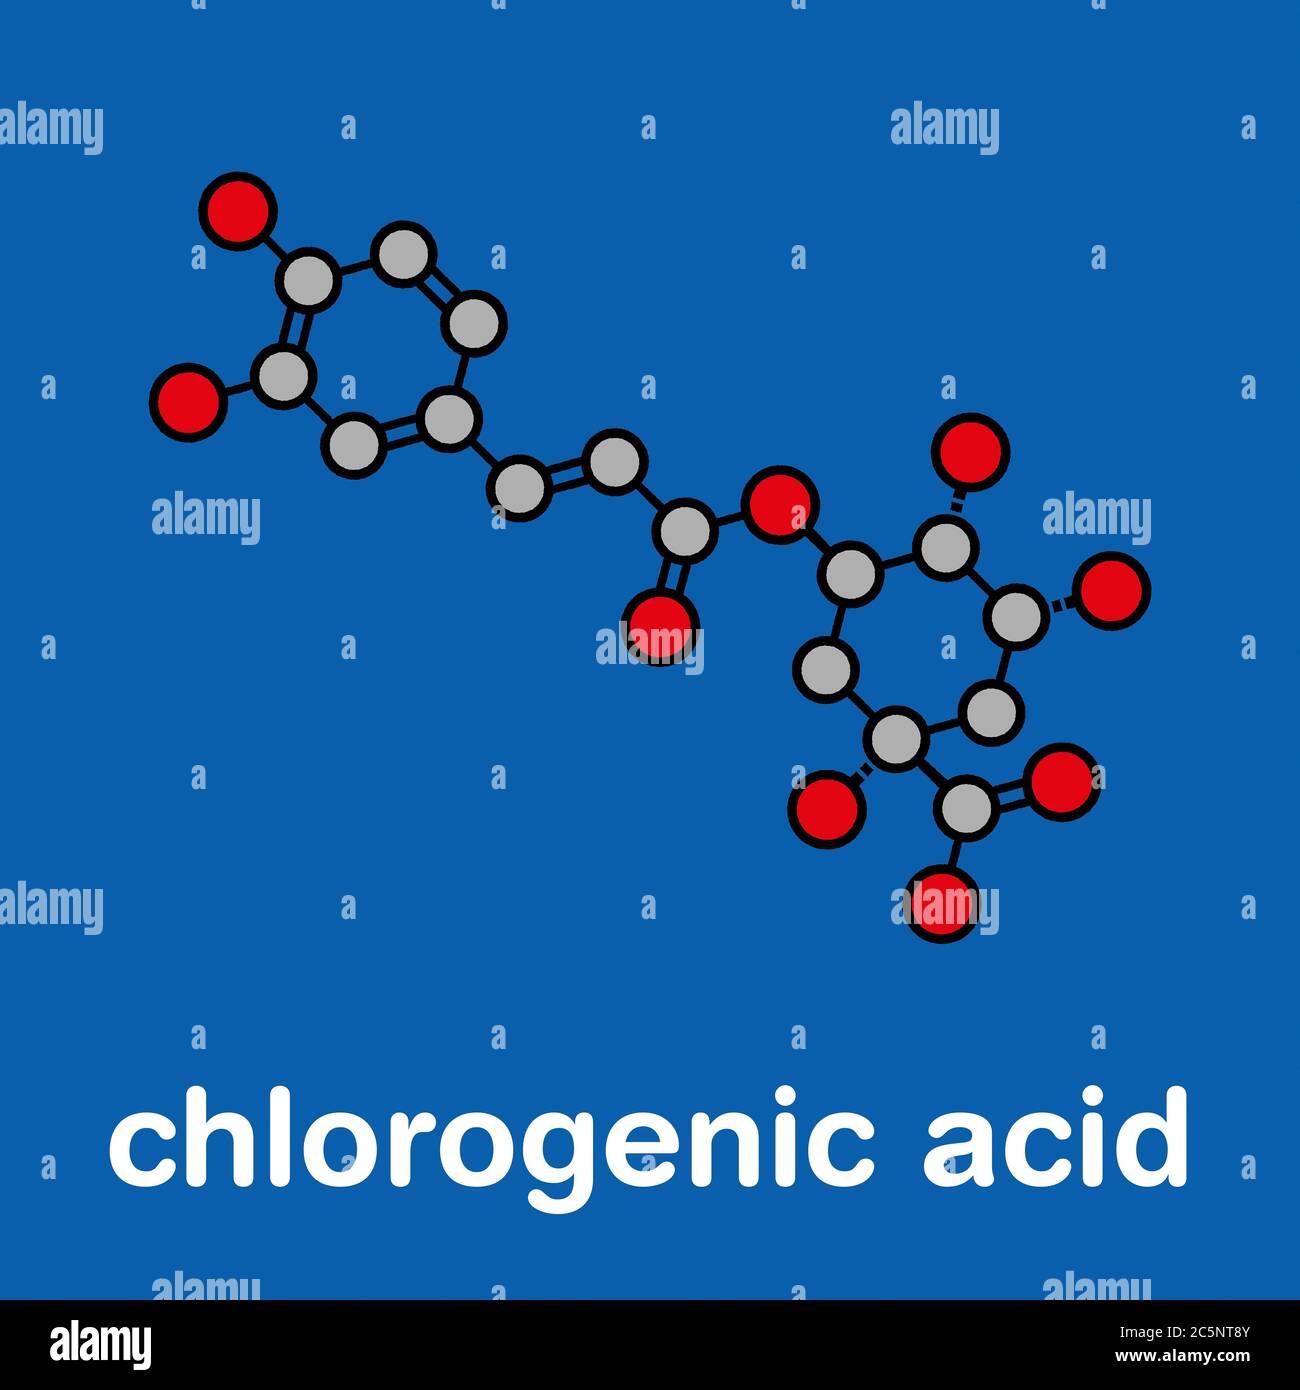 Chlorogenic acid herbal molecule. Stylized skeletal formula (chemical structure): Atoms are shown as color-coded circles: hydrogen (hidden), carbon (grey), oxygen (red). Stock Photo